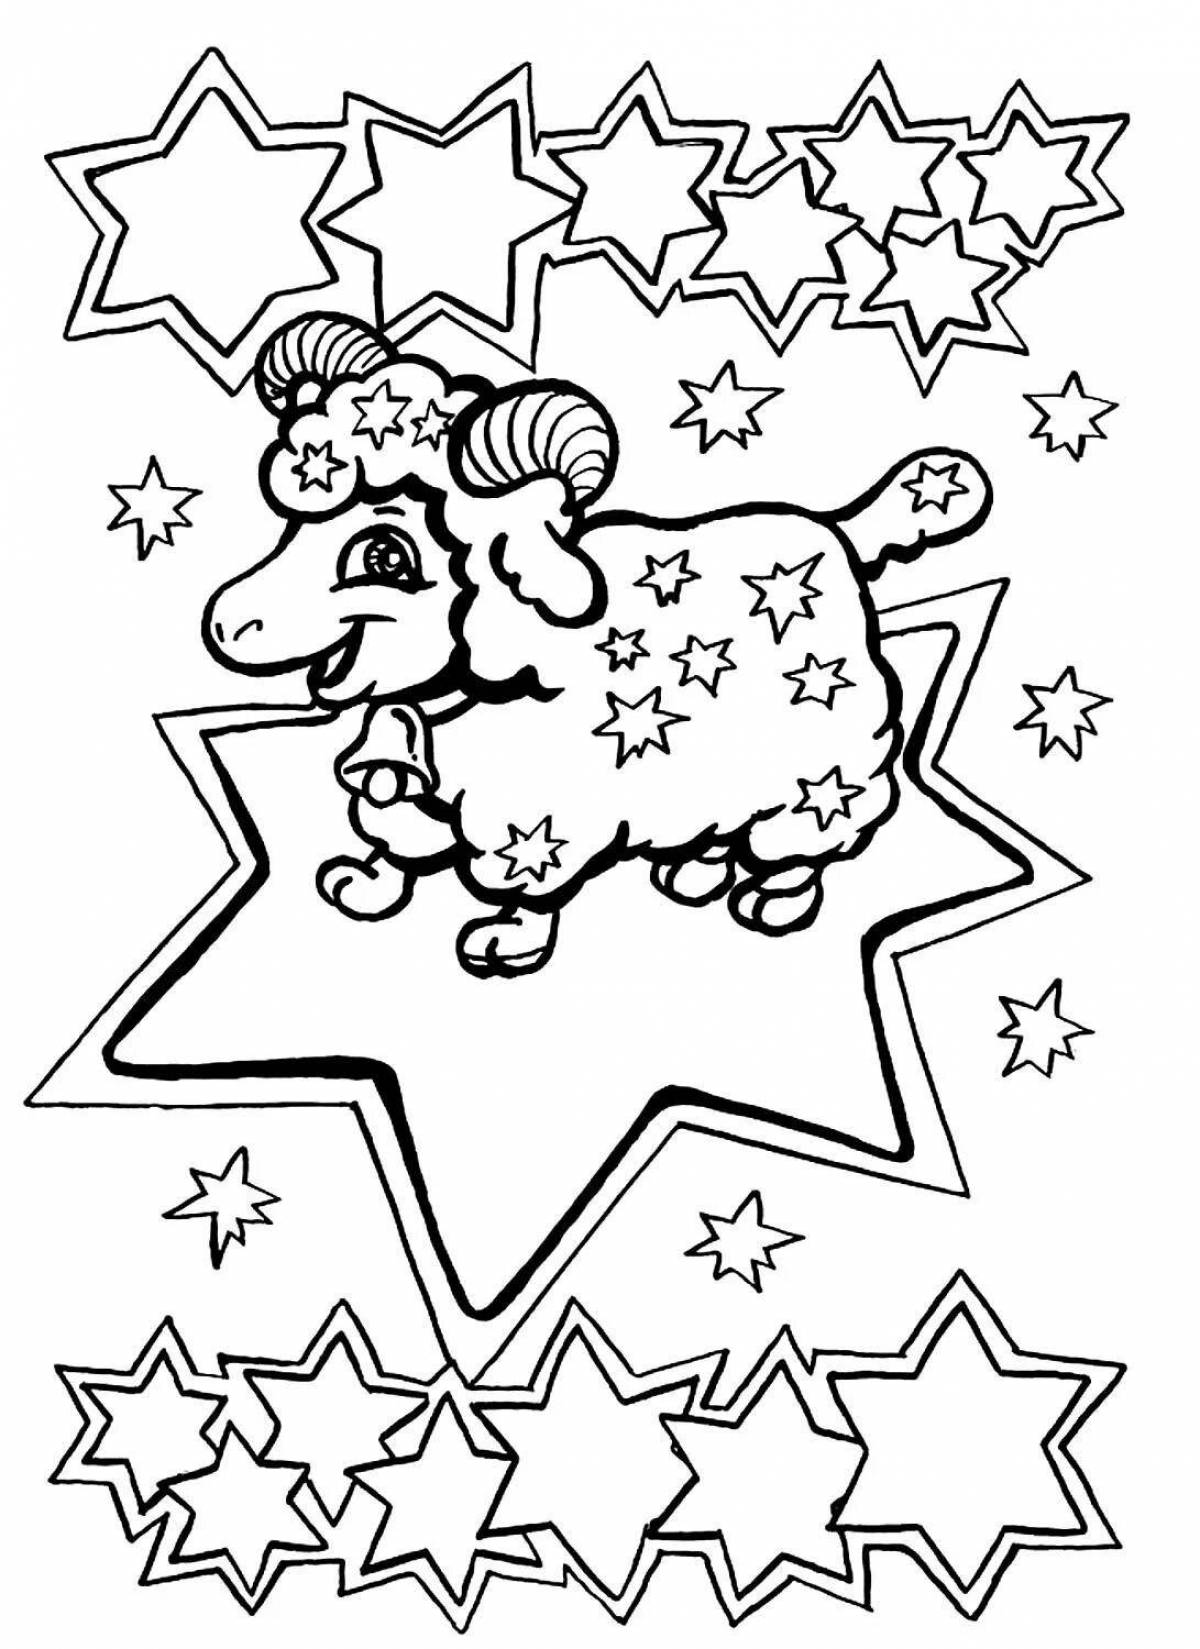 Glorious ram coloring page